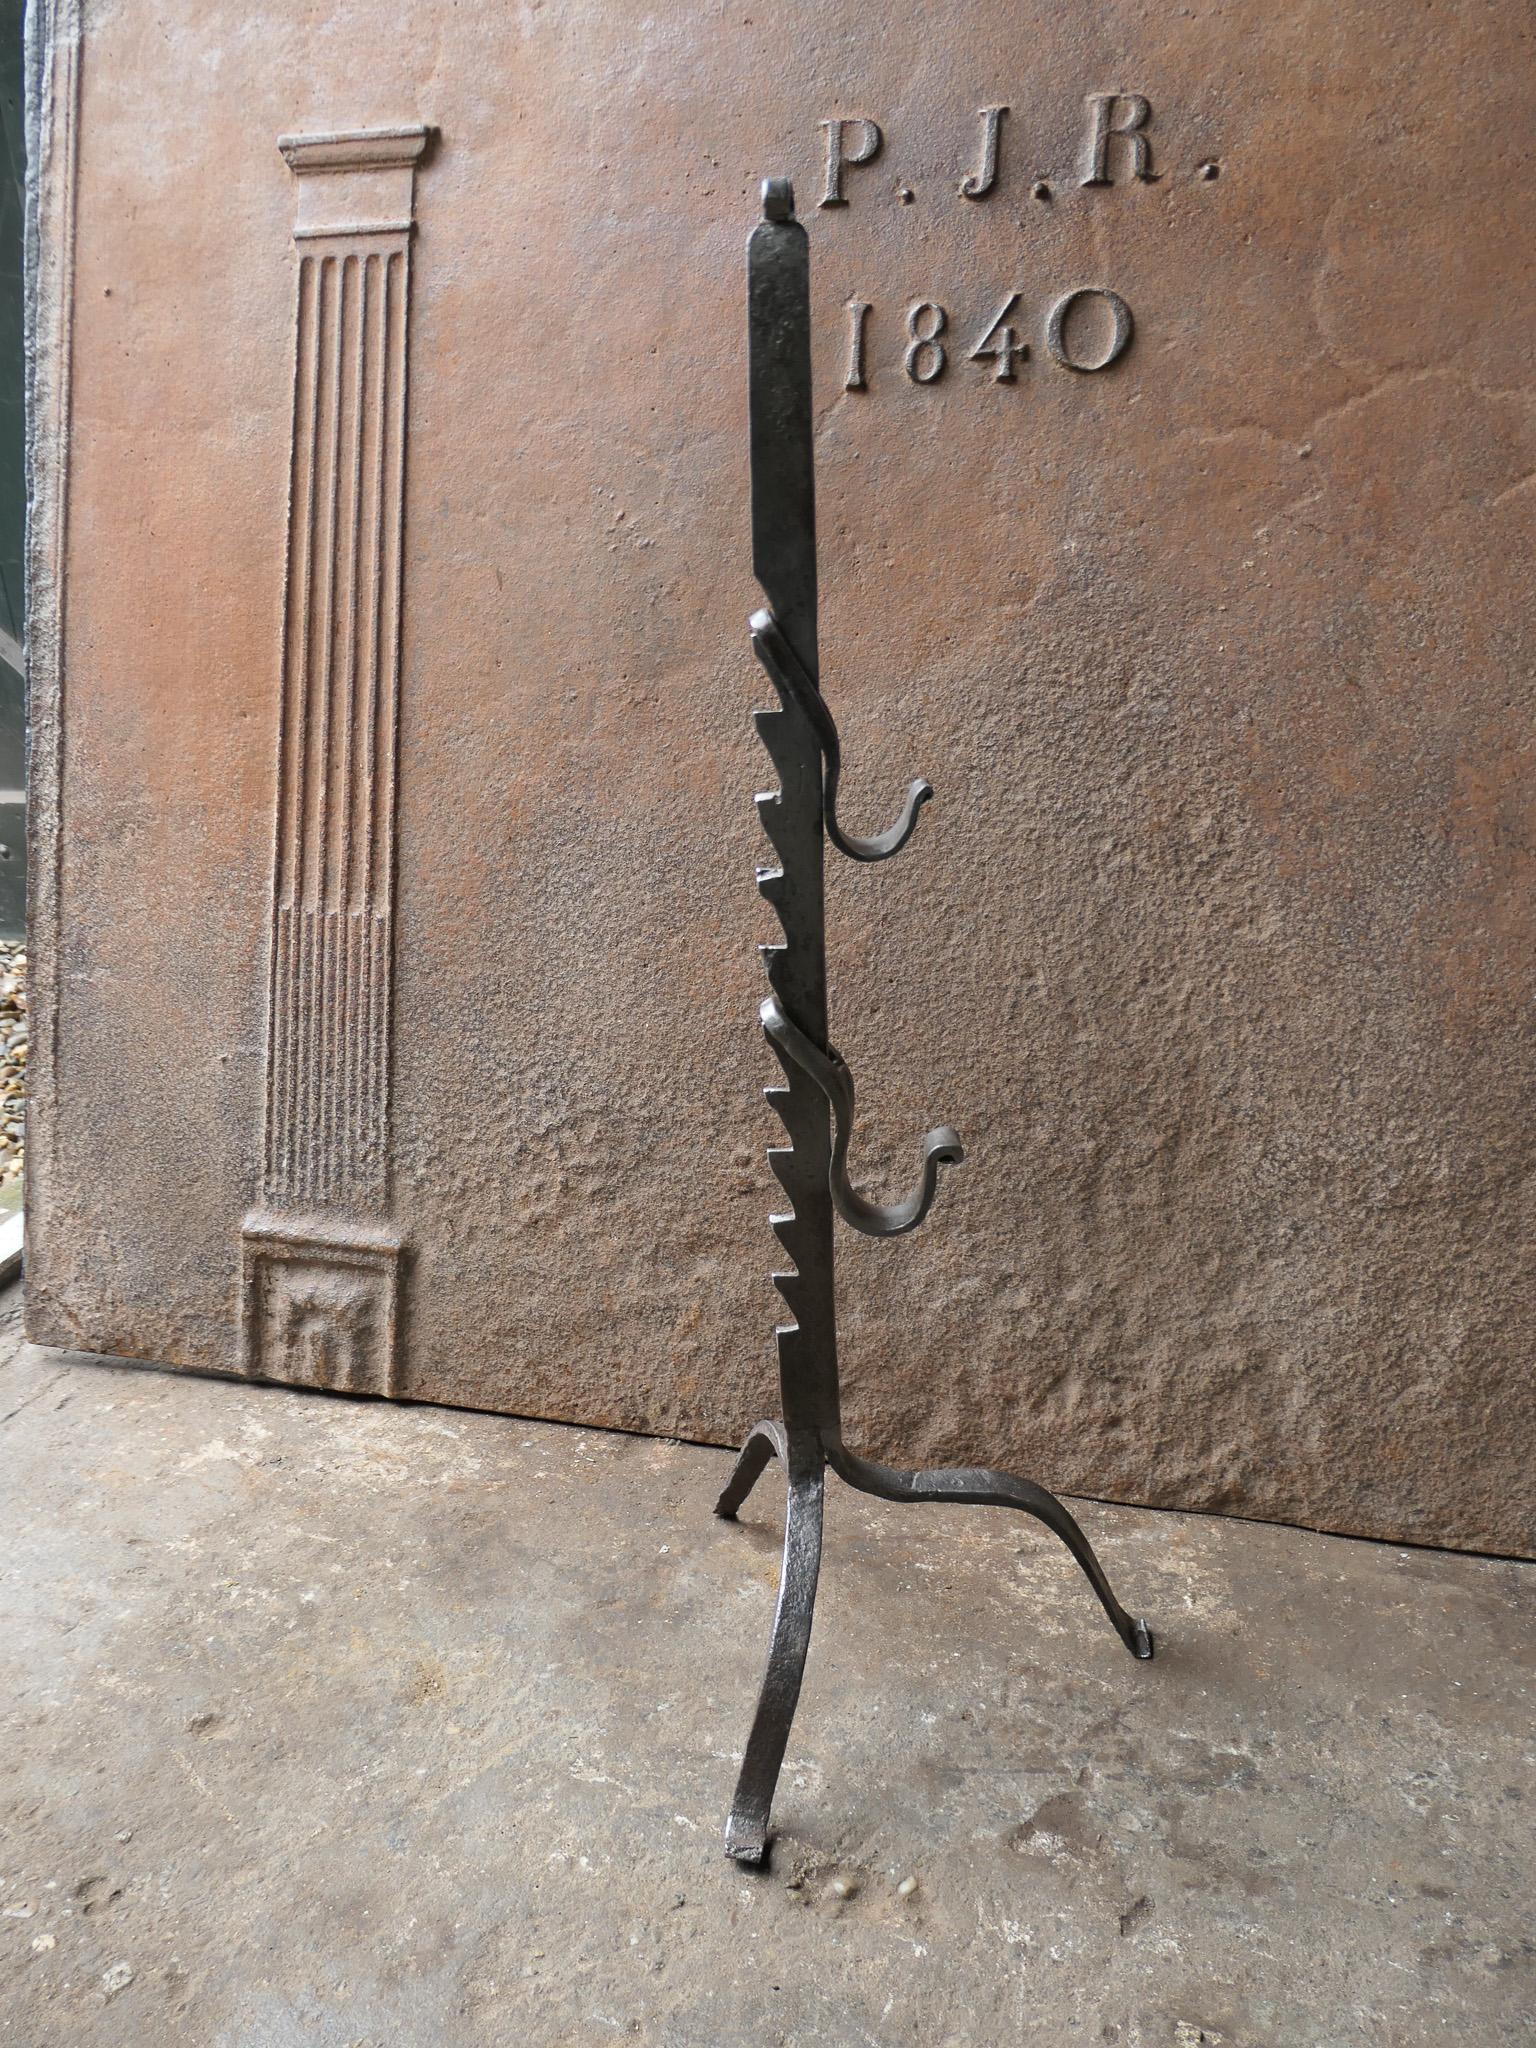 17th - 18th century French Louis XIV period stand for a roasting jack. The stand is hand forged and made of wrought iron. The condition is good.

